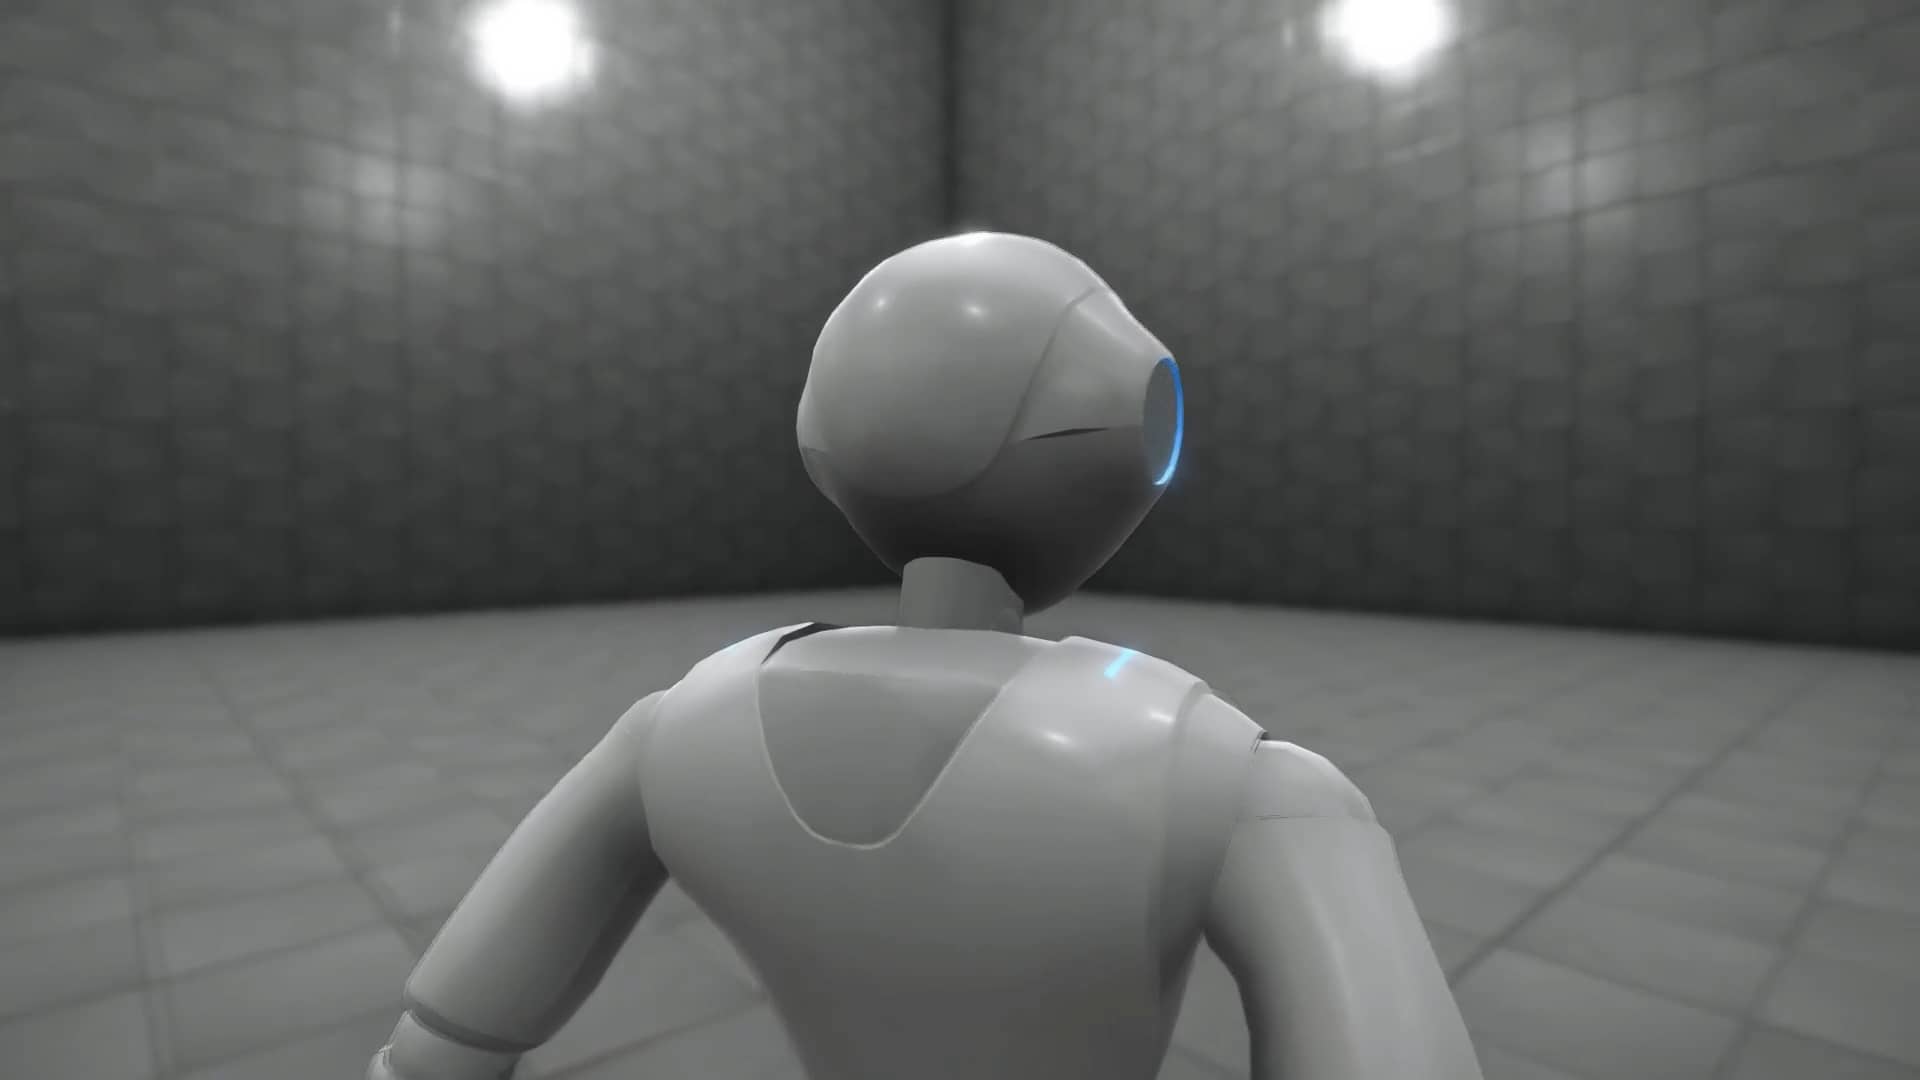 coder-coded-pepper-simulator-and-remote-controller-in-unity-on-vimeo